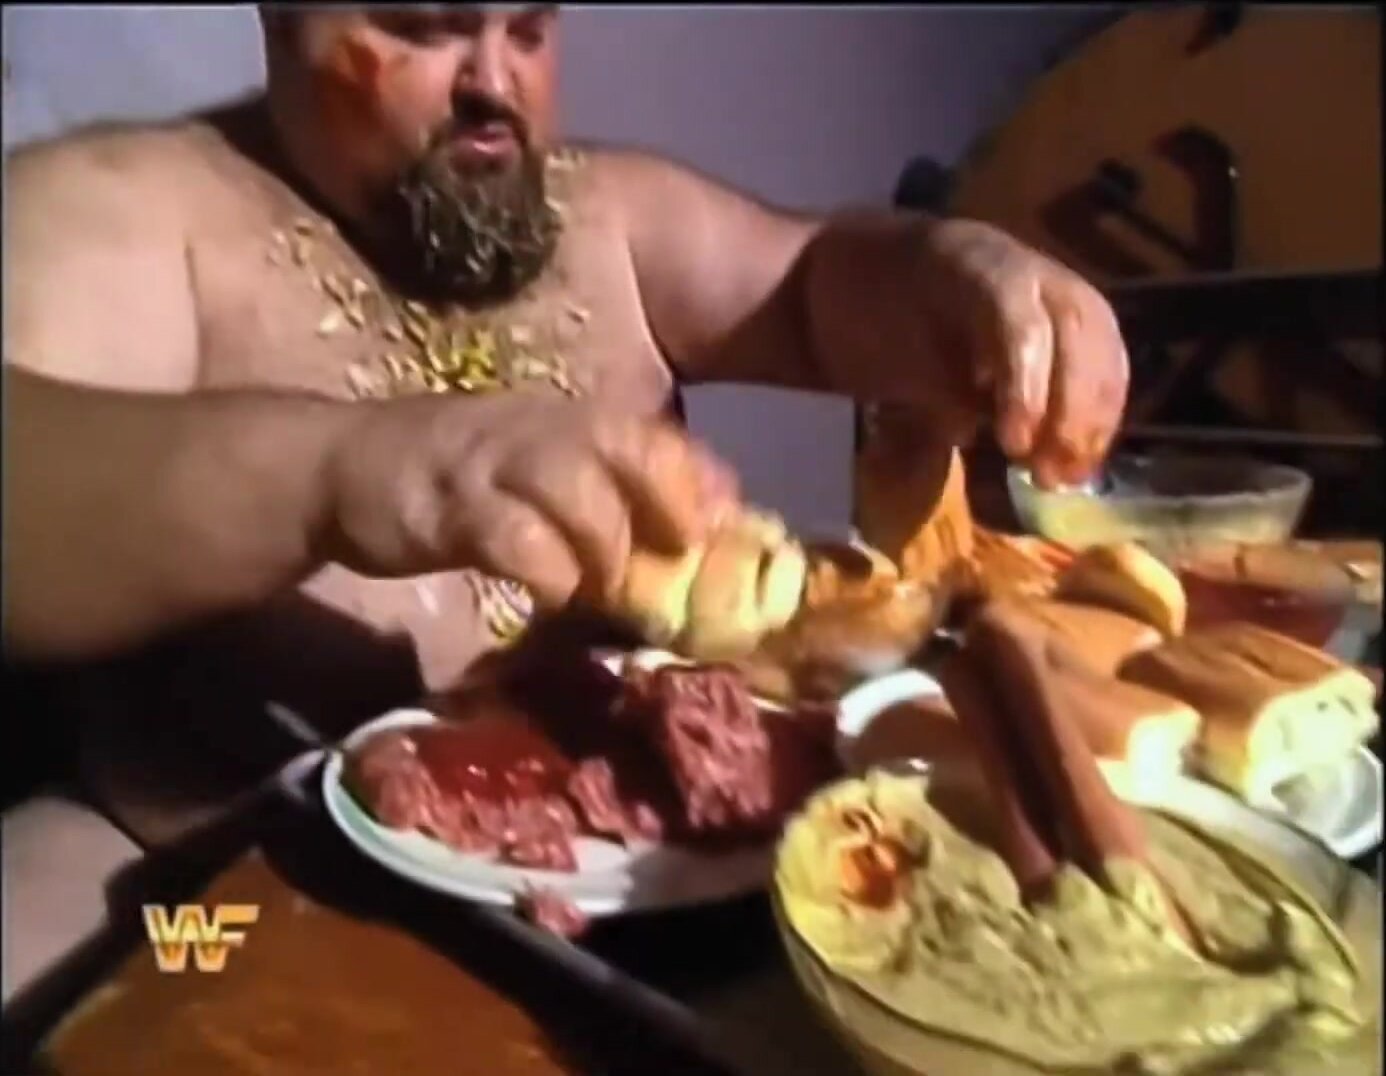 Fat Slob Wrestler pigs out on camera